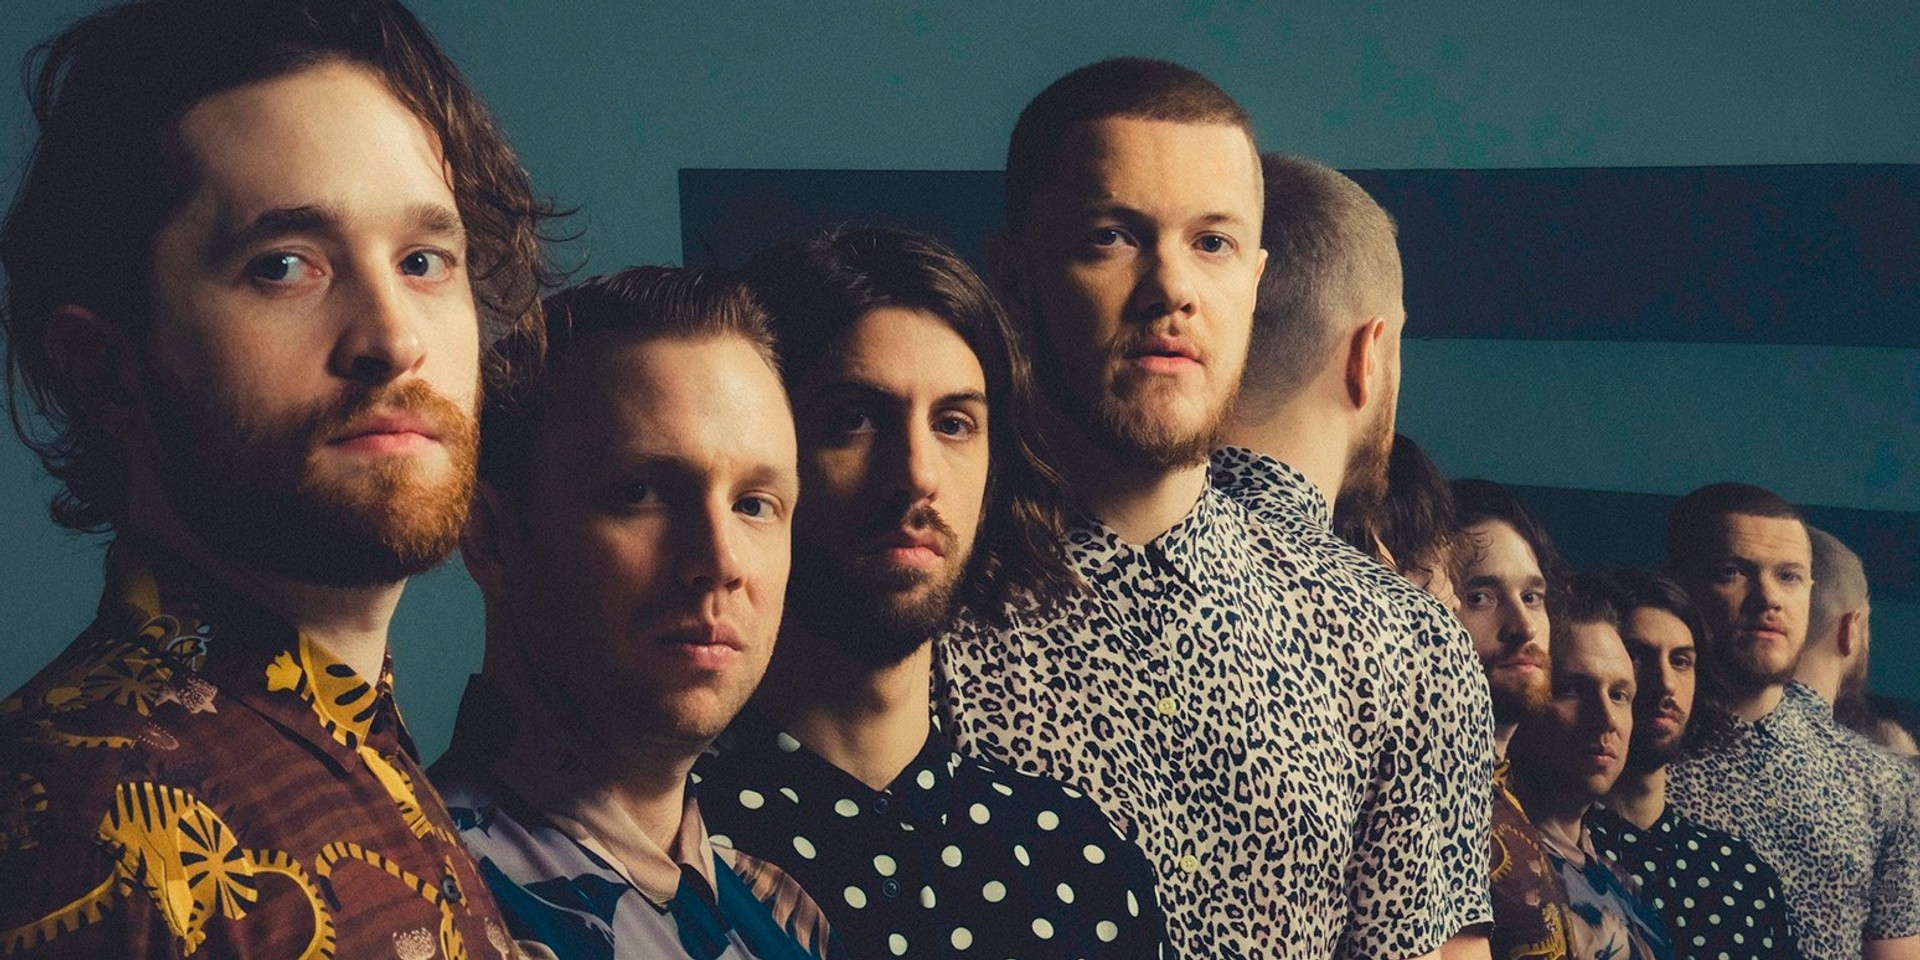 Imagine Dragons pop-up event to be held in Singapore